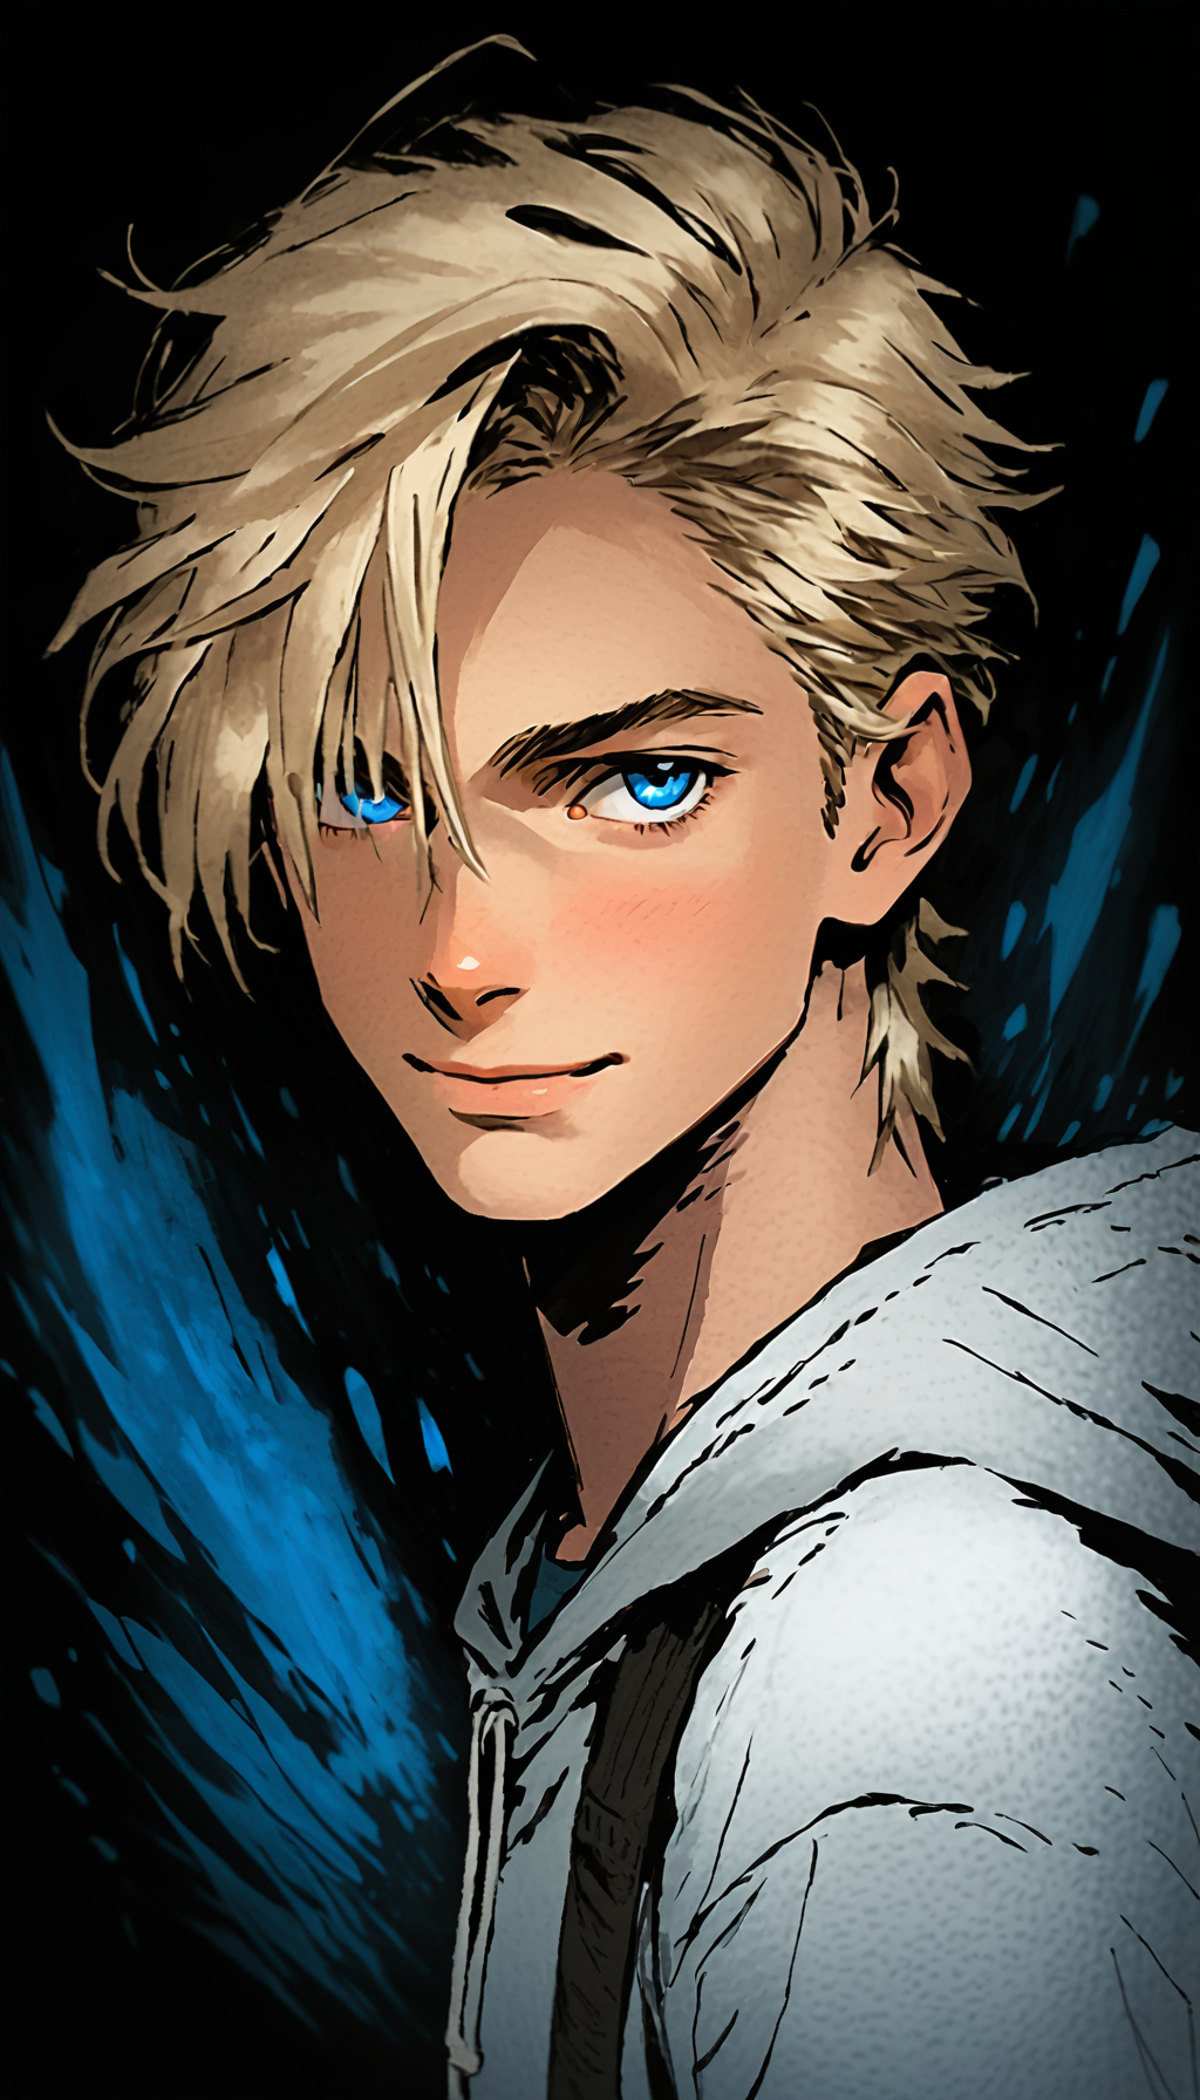 A cartoon image of a young man with blonde hair, blue eyes, and a yellow hoodie.